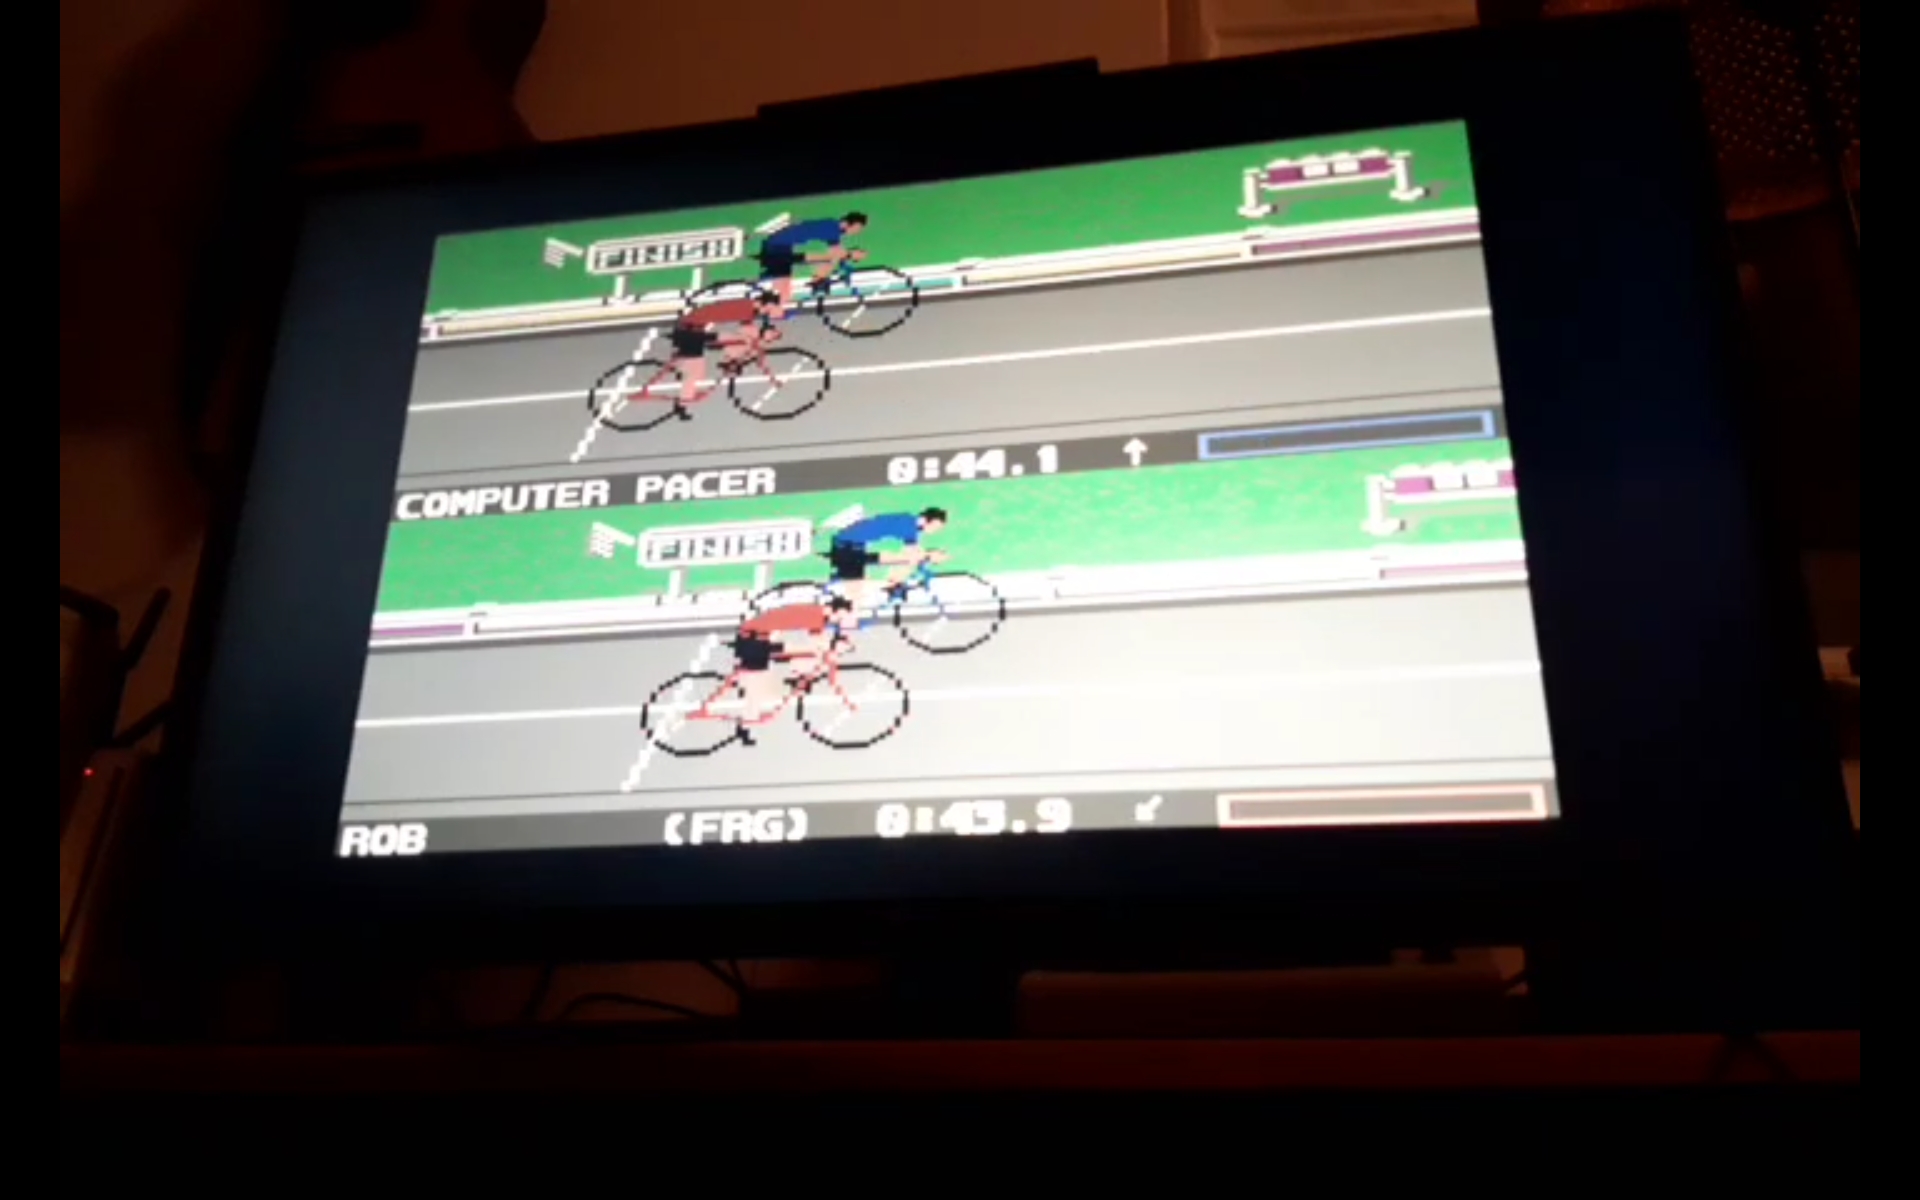 RetroRob: Summer Games 2: Cycling (Commodore 64 Emulated) 0:00:43.9 points on 2022-11-04 14:14:20